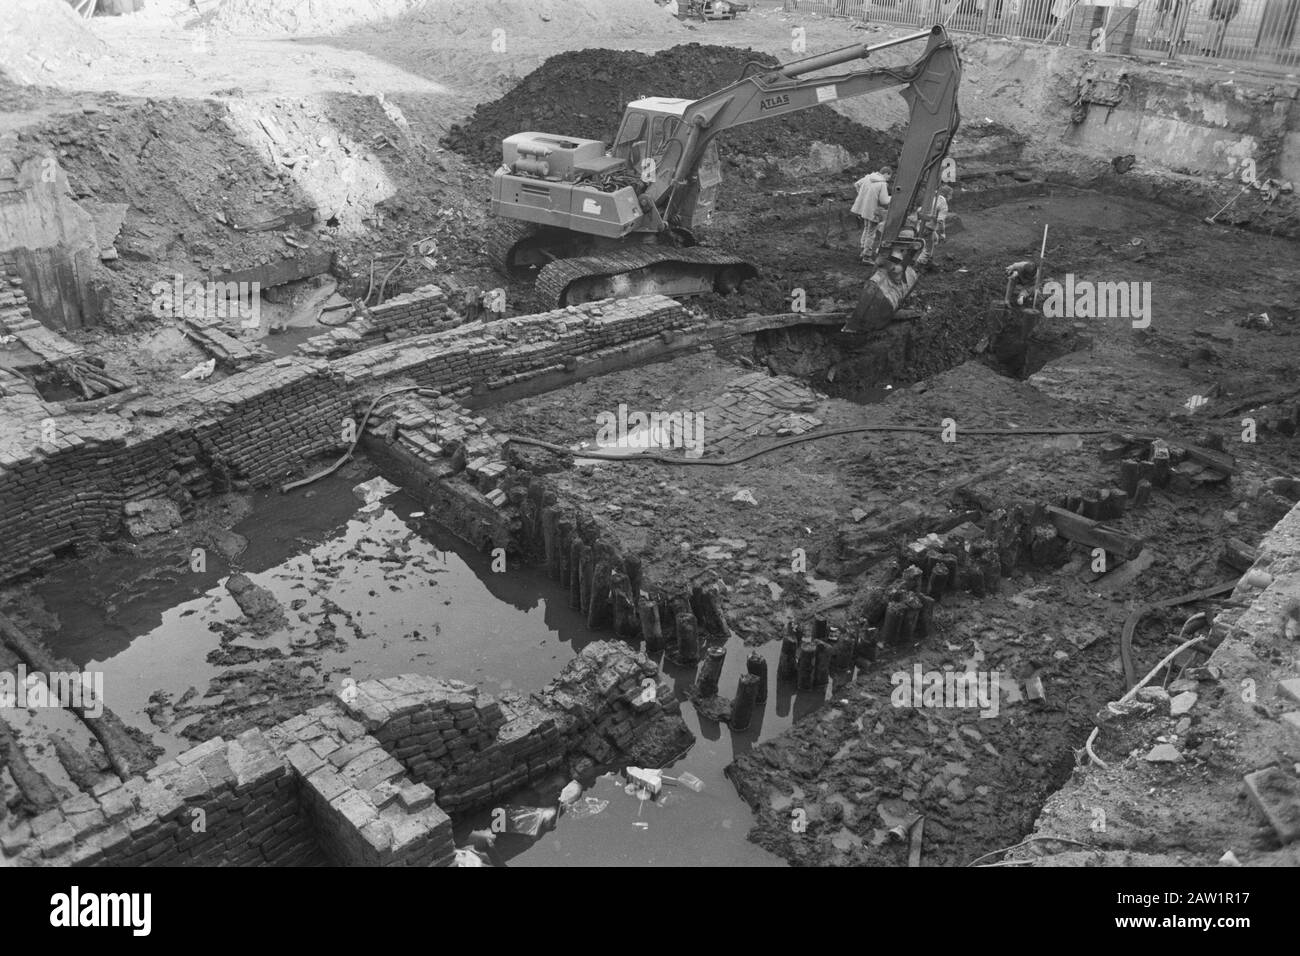 Excavations at Nieuwendijk Amsterdam lay old foundations expose Date: October 19, 1987 Location: Amsterdam, Noord-Holland Keywords: FOUNDATIONS, EXCAVATIONS Stock Photo